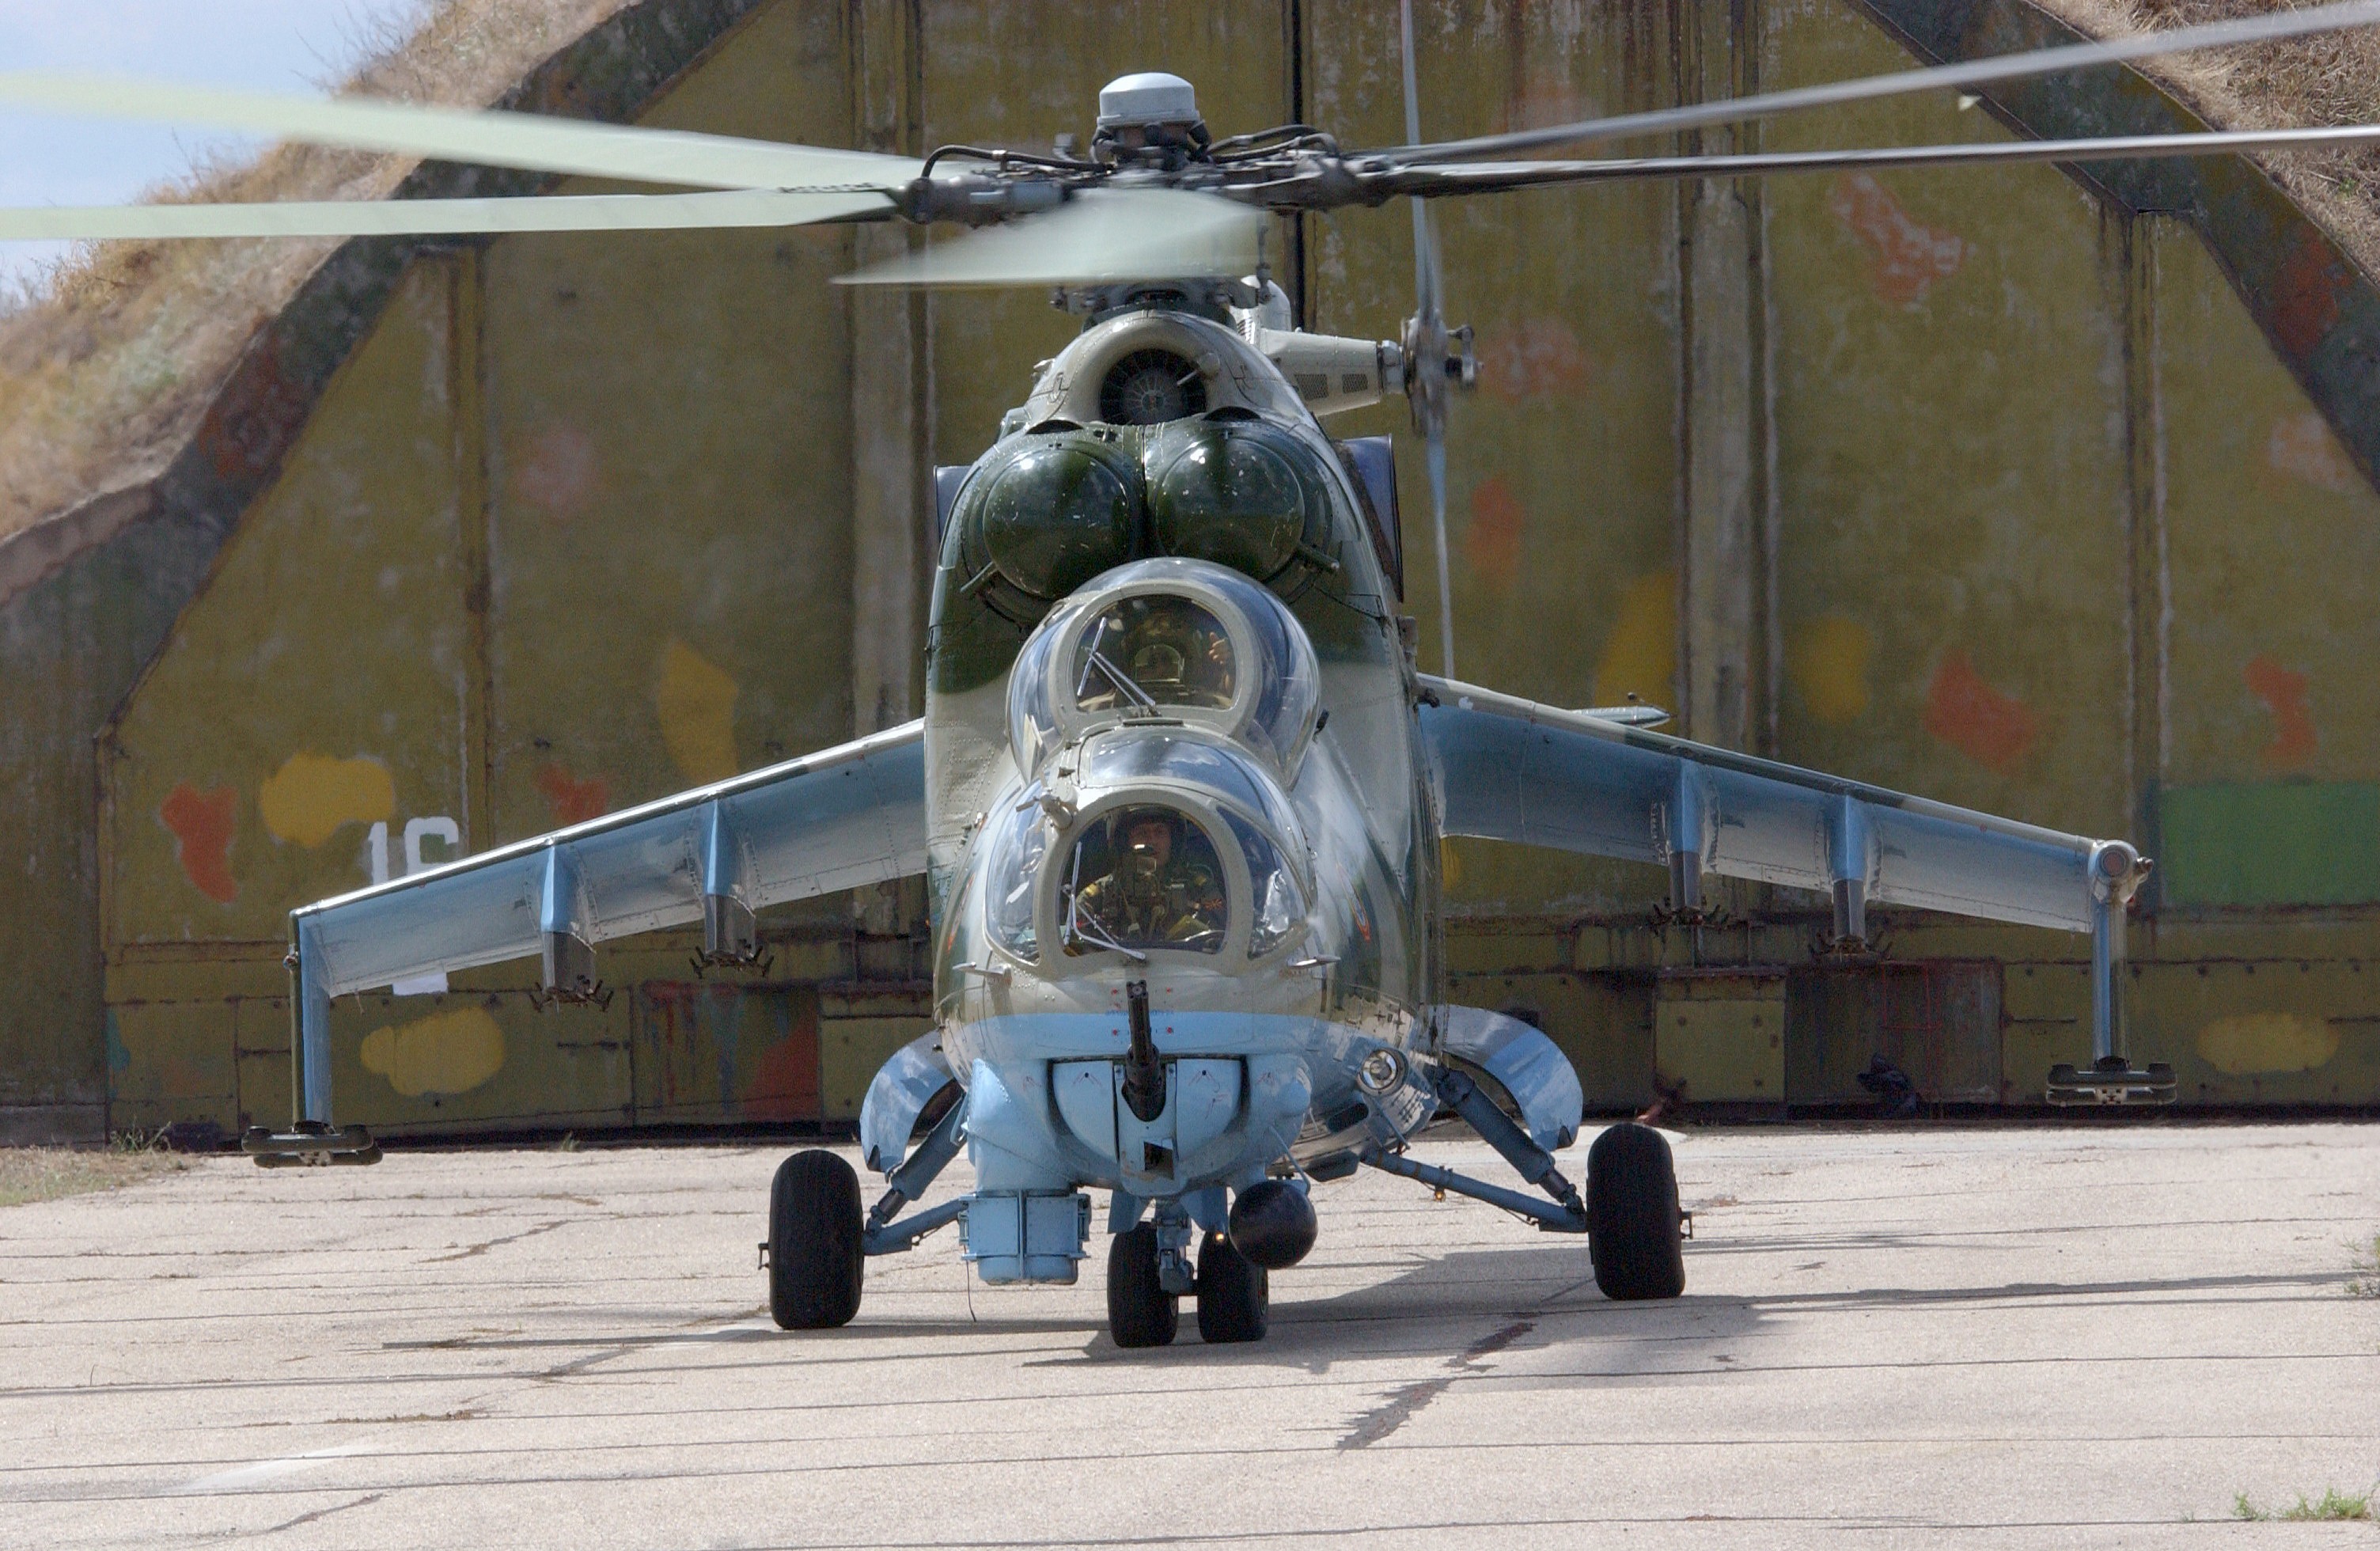 mi 24 Hind, Helicopters, Military Wallpaper